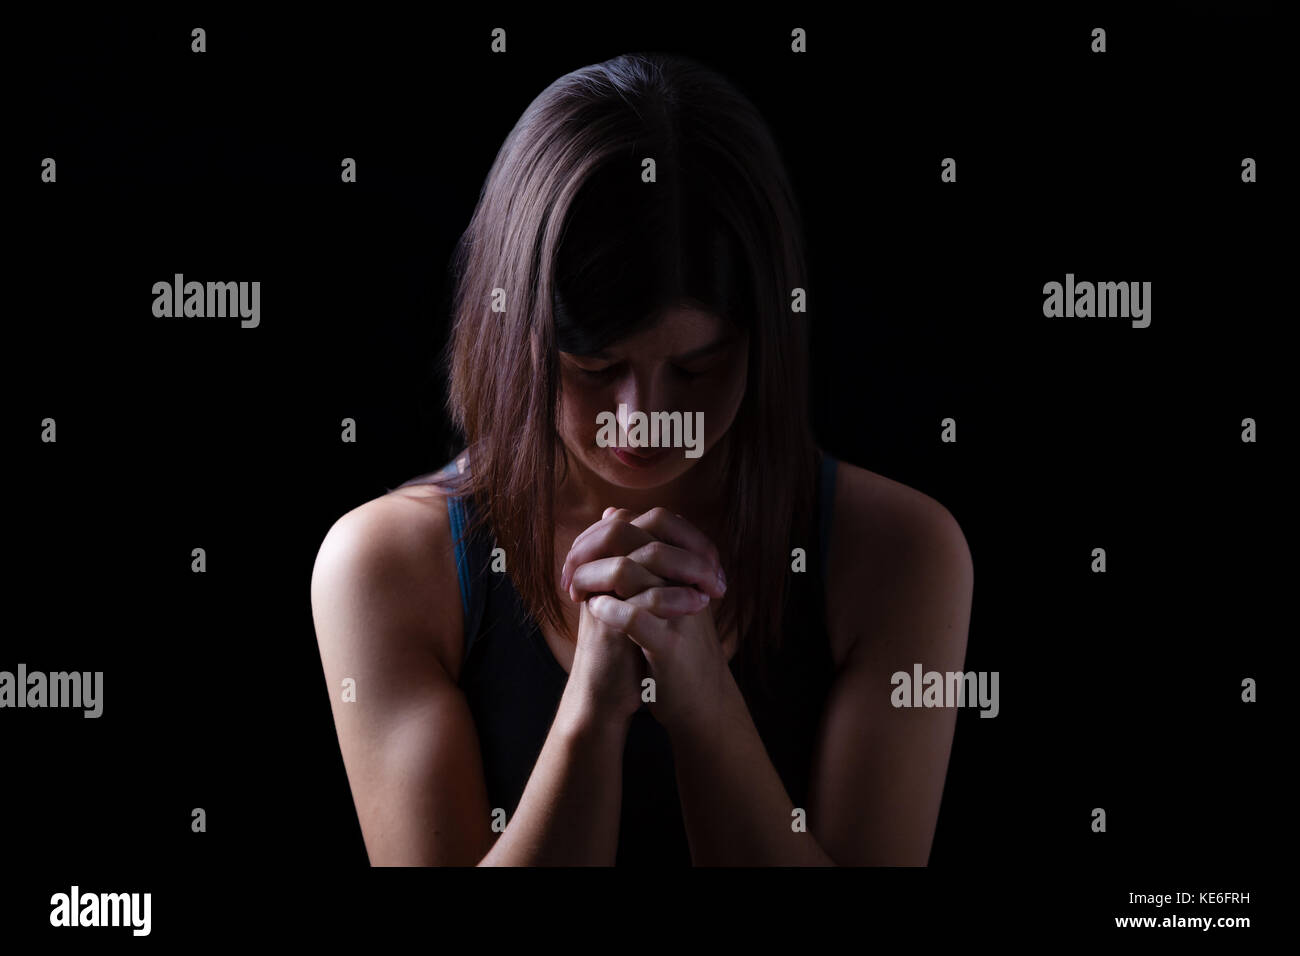 Faithful athletic woman praying, with hands folded in worship to god, head down and eyes closed in religious fervor, on low key black background. pray Stock Photo